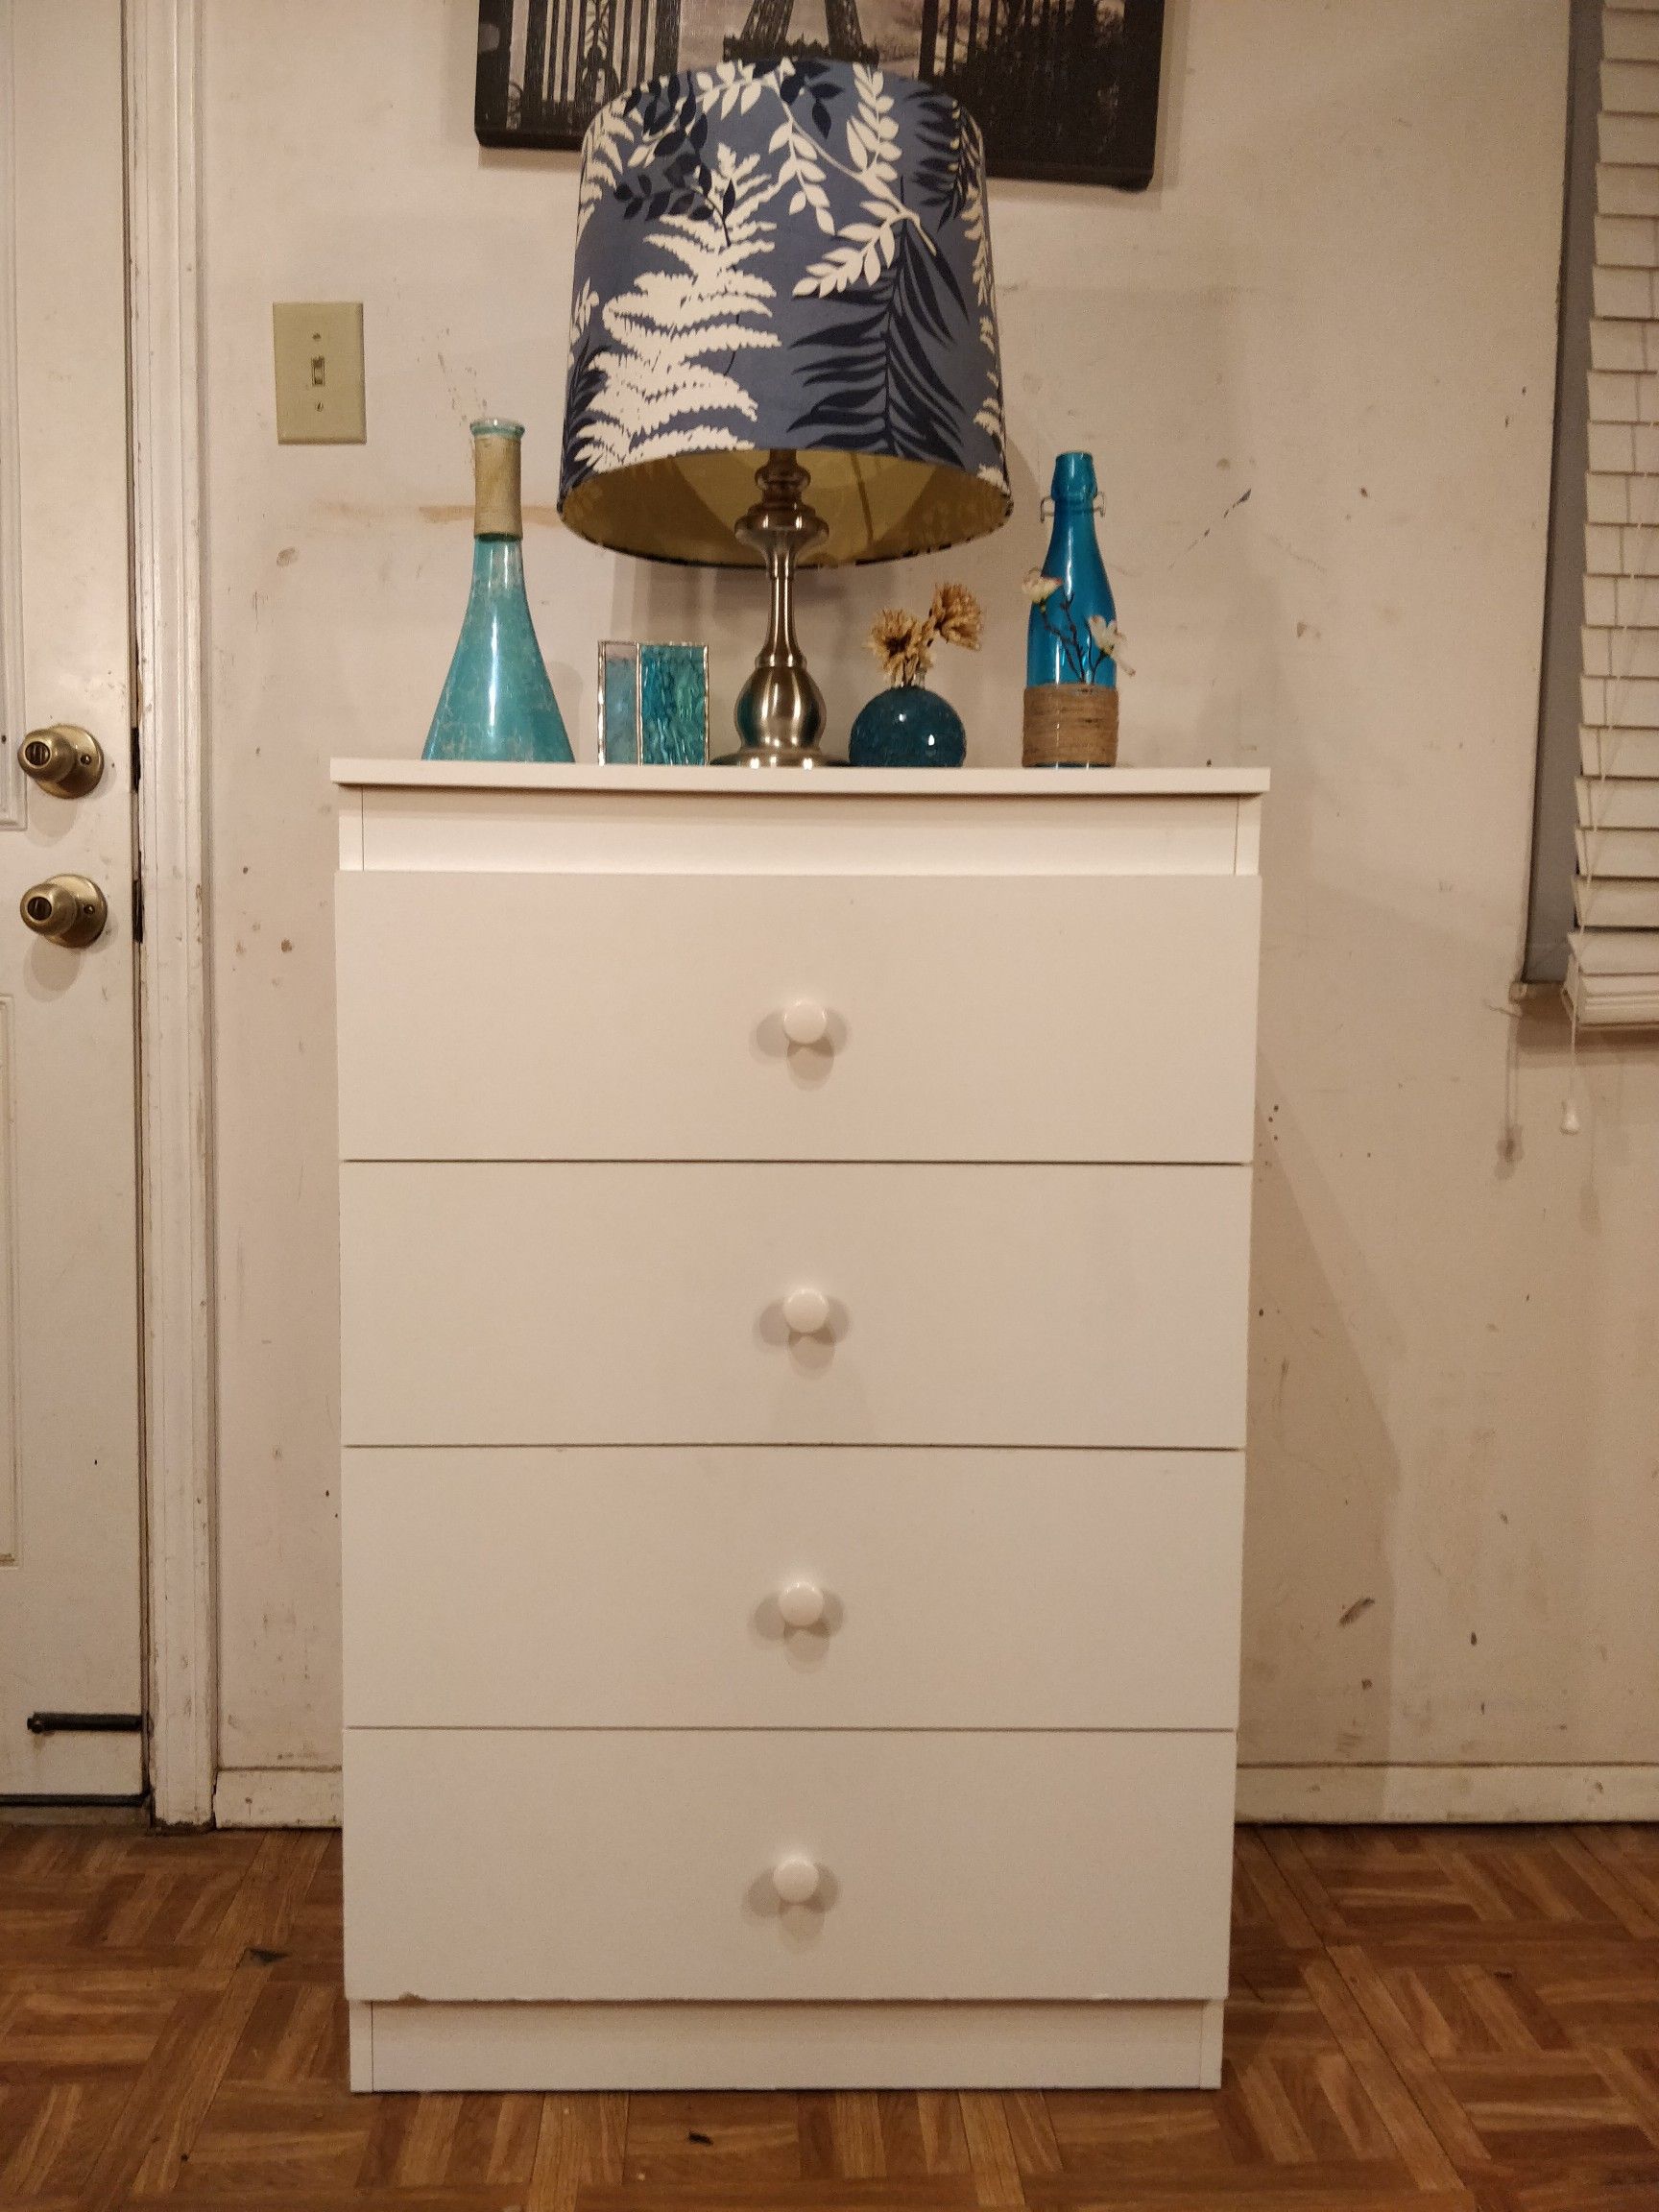 Nice white chest dresser/TV stand in good condition, pet free smoke free, all drawers working well. L25.5"*W13.5"*H38.5"